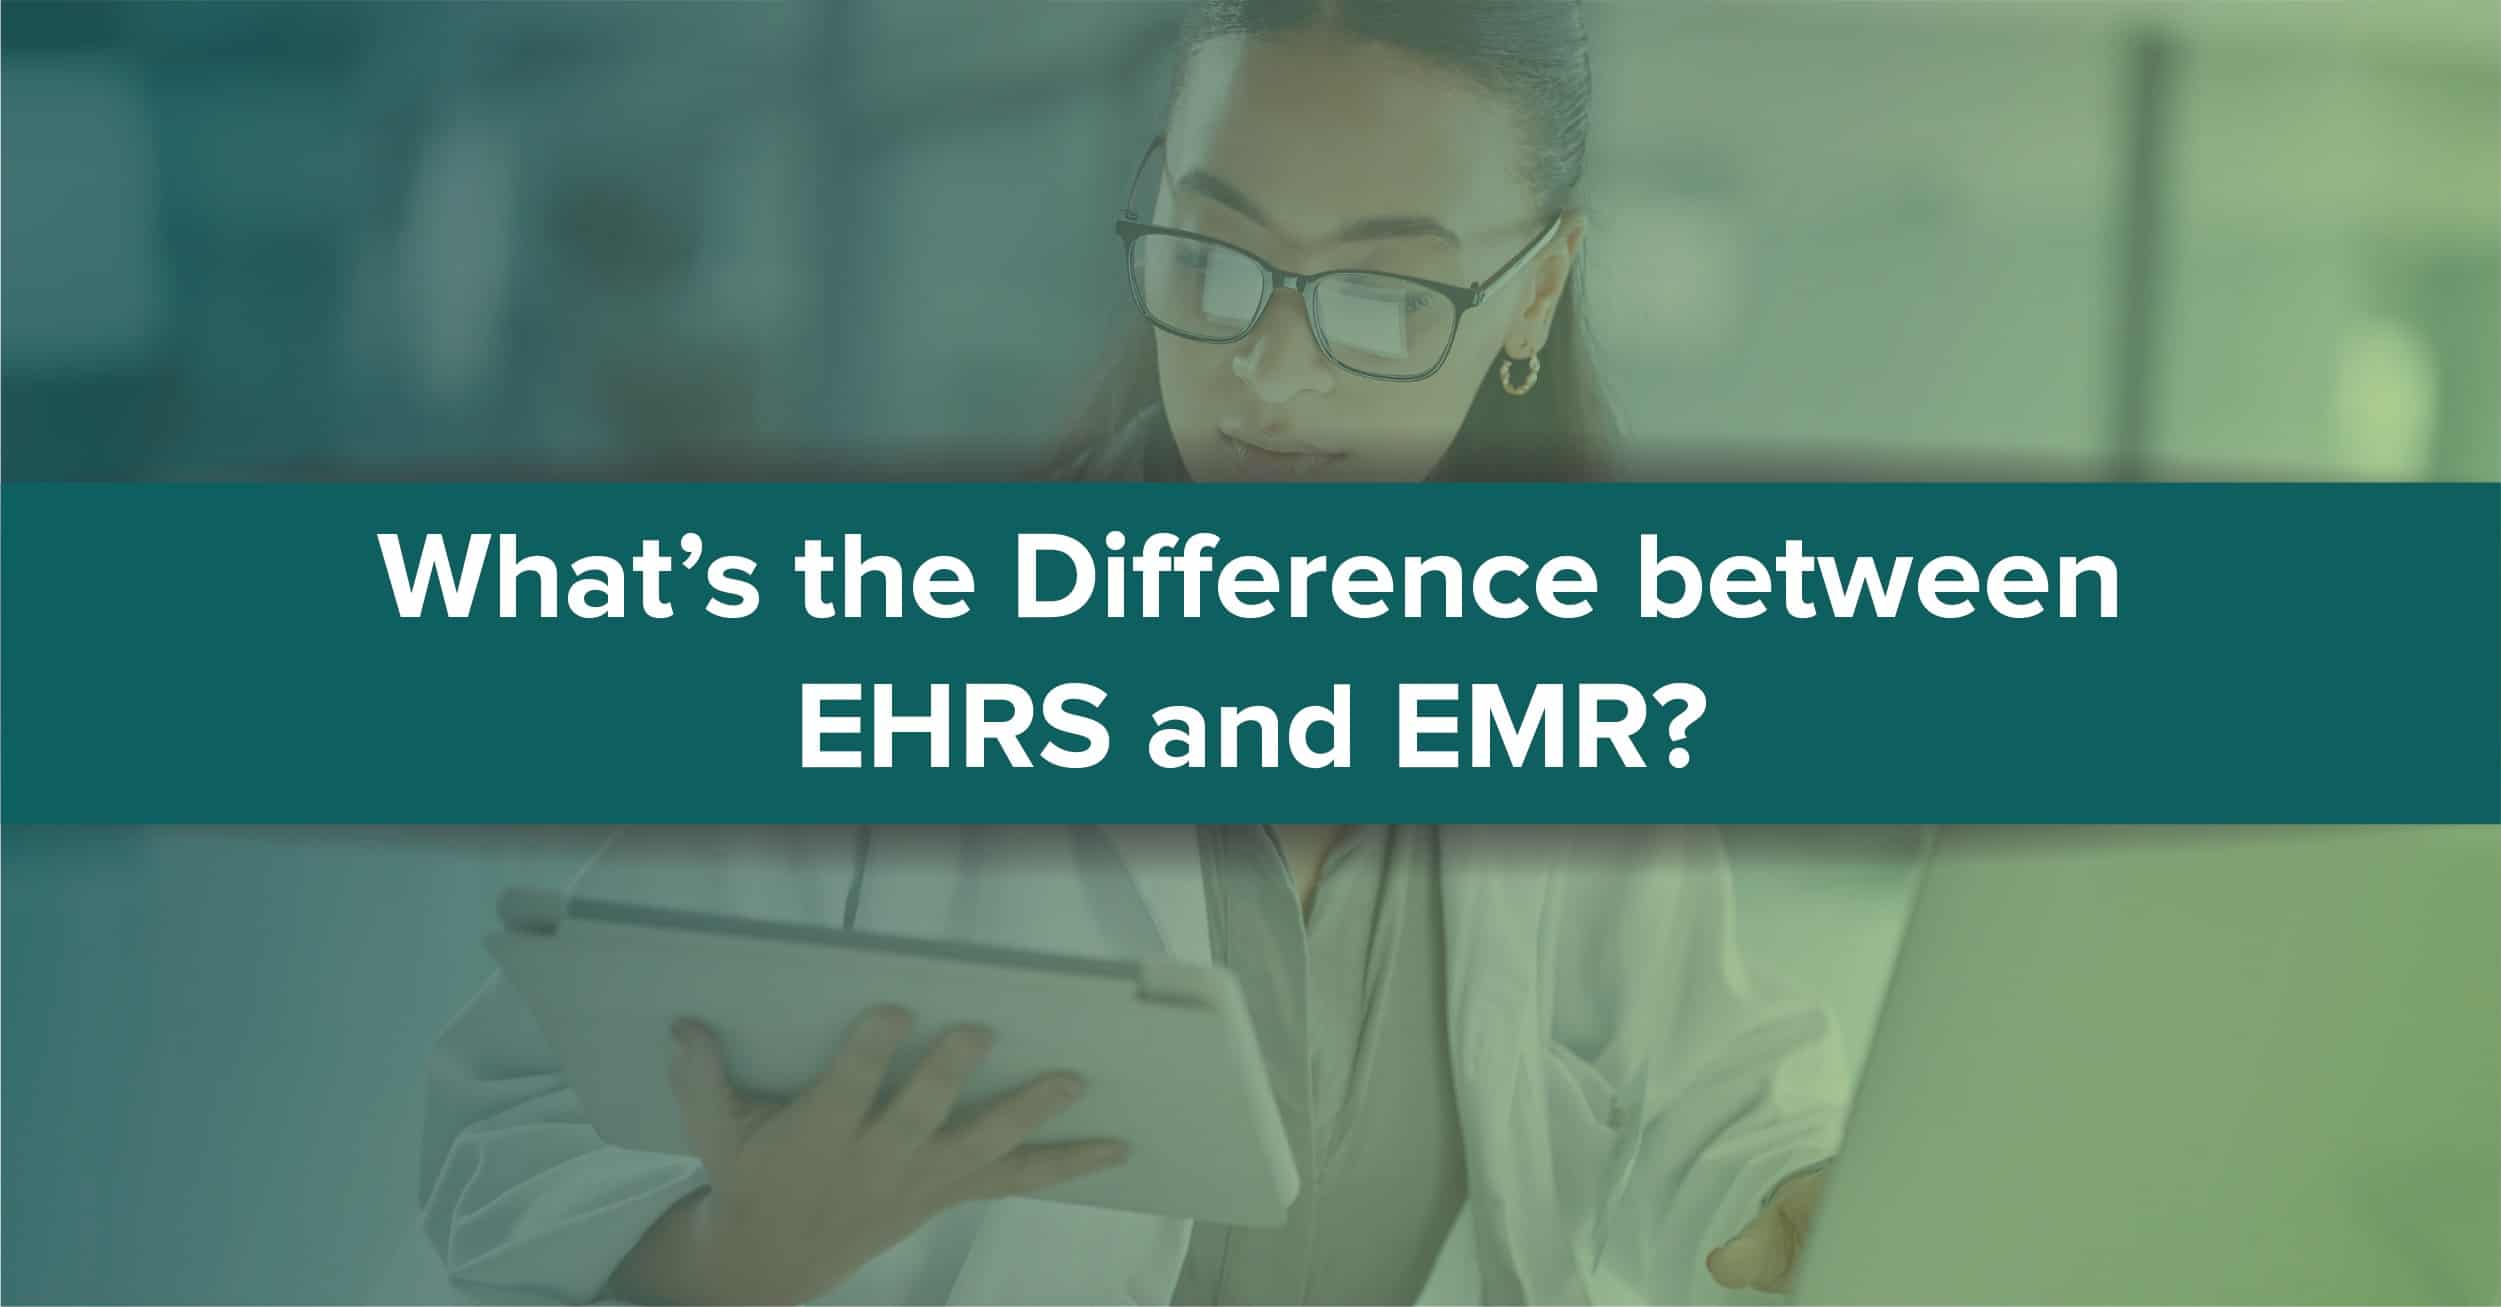 What’s the difference between EHRS and EMR?